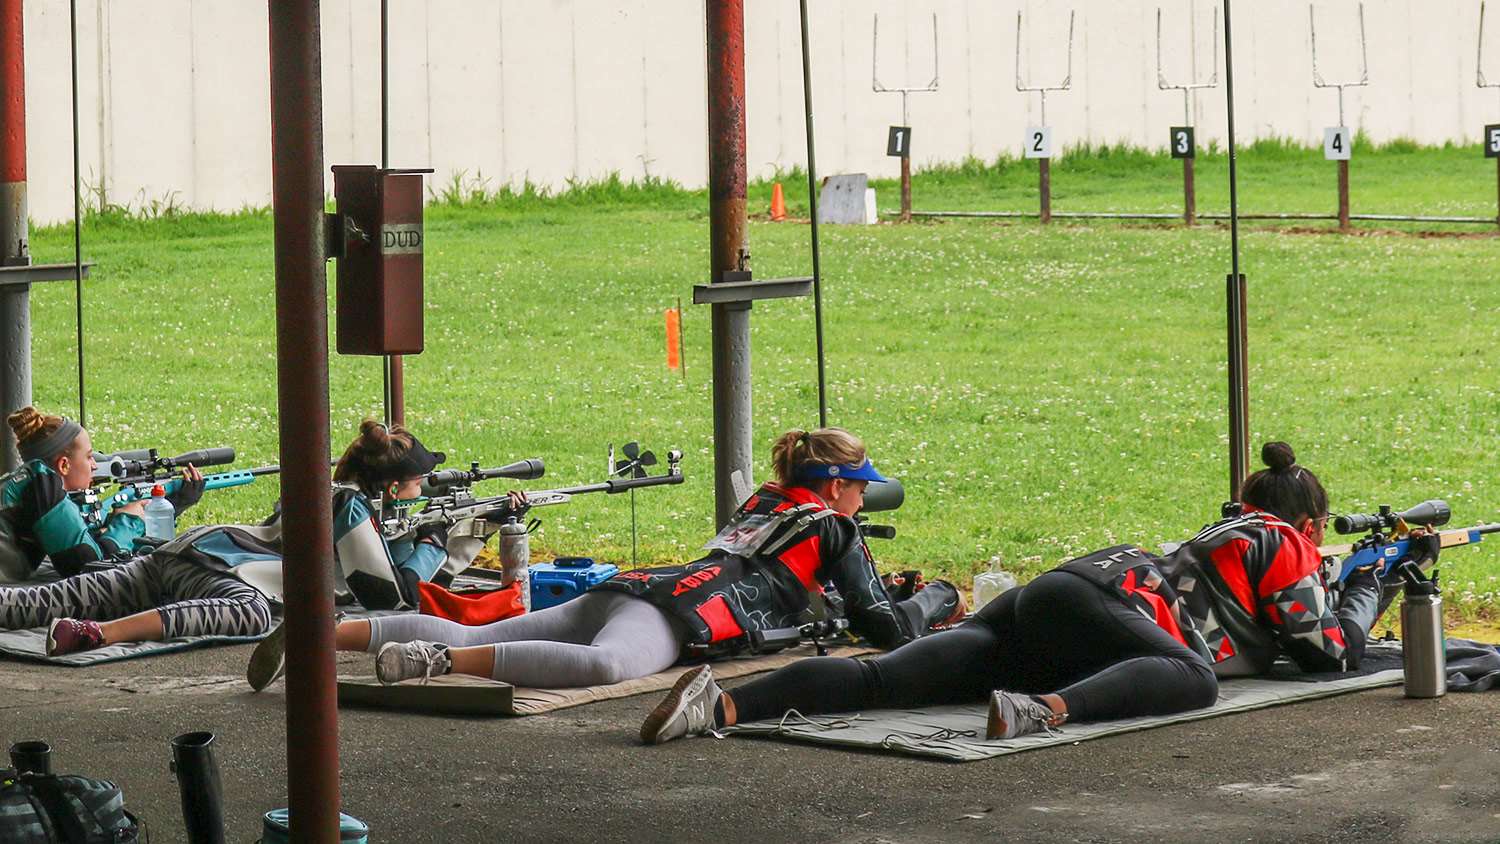 Tips on how to master the prone shooting position in precision rifle disciplines